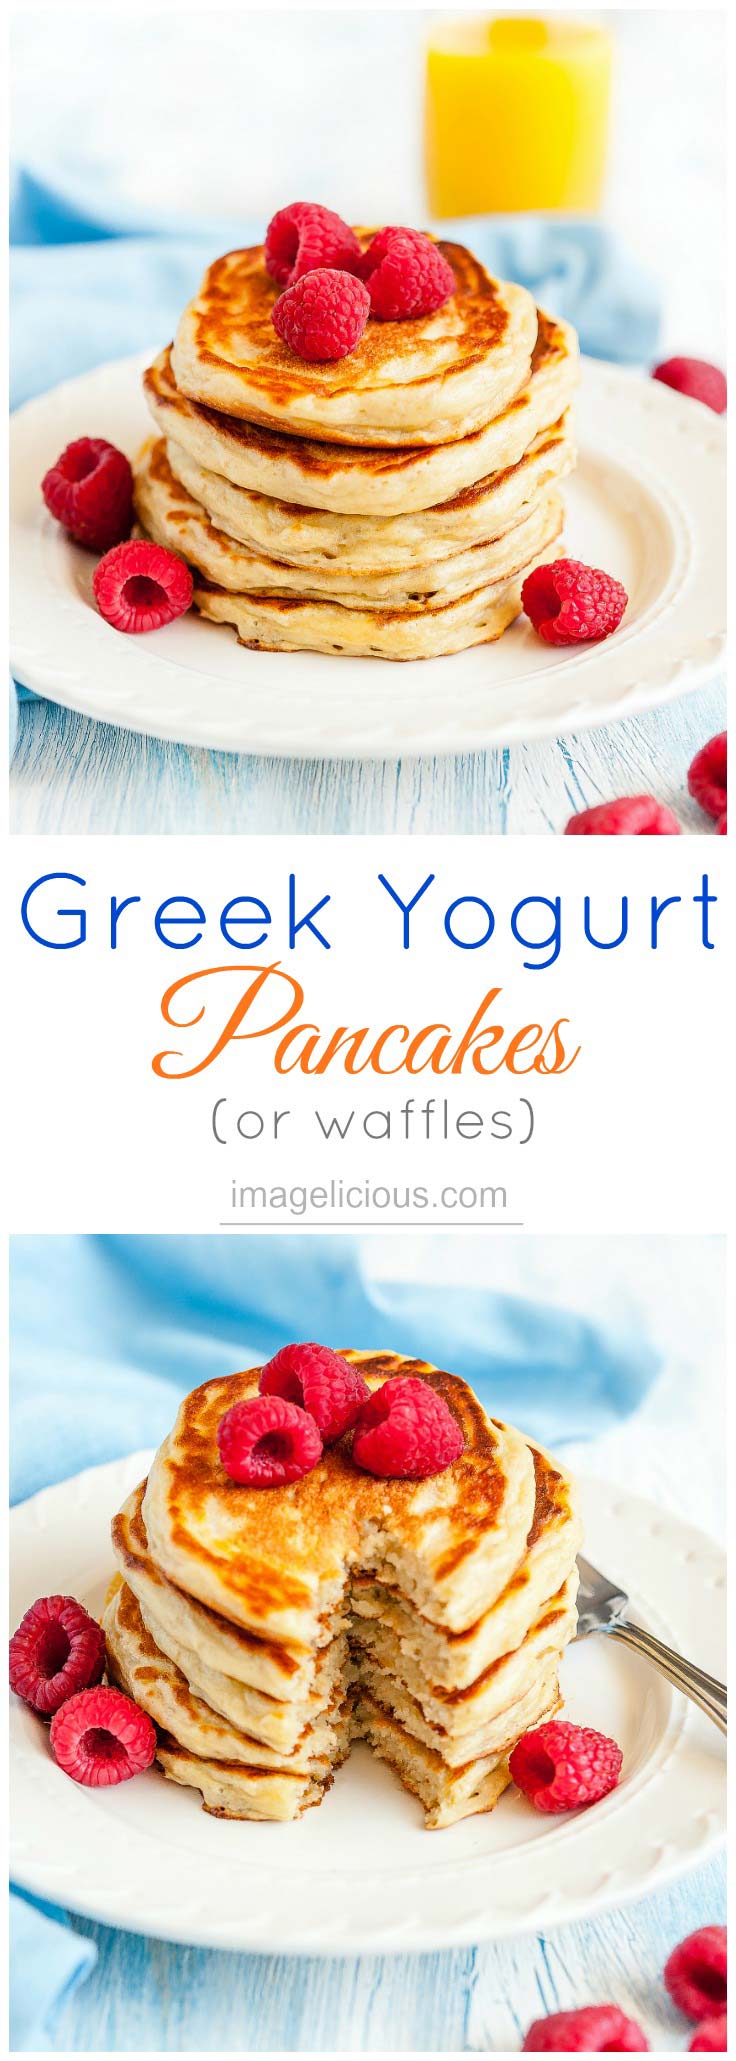 These Greek Yogurt Pancakes are the easiest and fluffiest pancakes you'll ever have. Made with healthy greek yogurt and oats they'll become your favourite breakfast. Make them into waffles for a crispy treat | Imagelicious